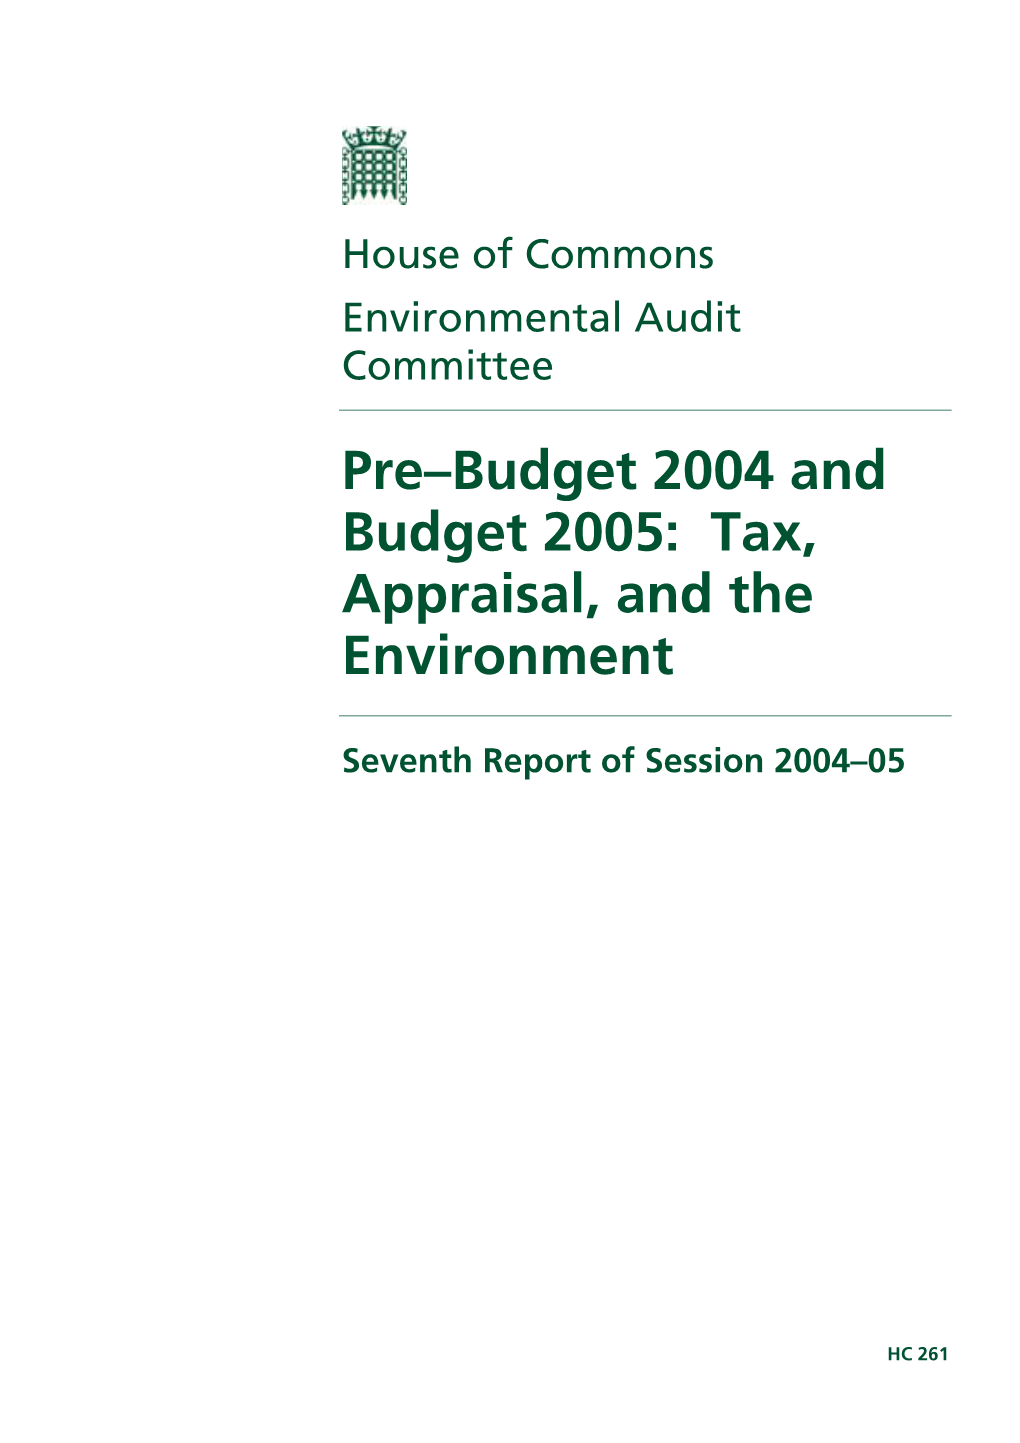 Pre–Budget 2004 and Budget 2005: Tax, Appraisal, and the Environment